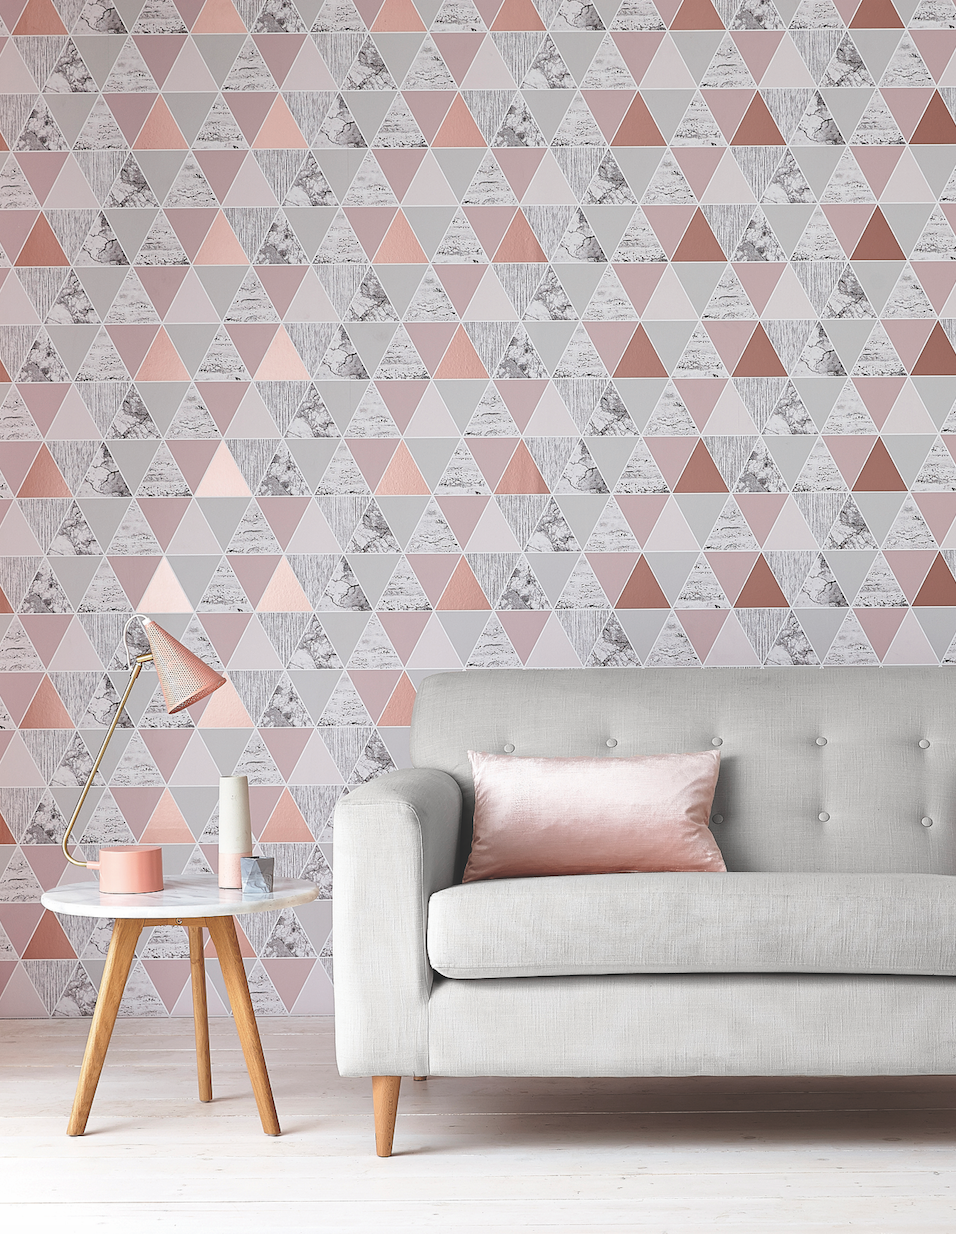 The 2017 Wallpaper Trends That Will